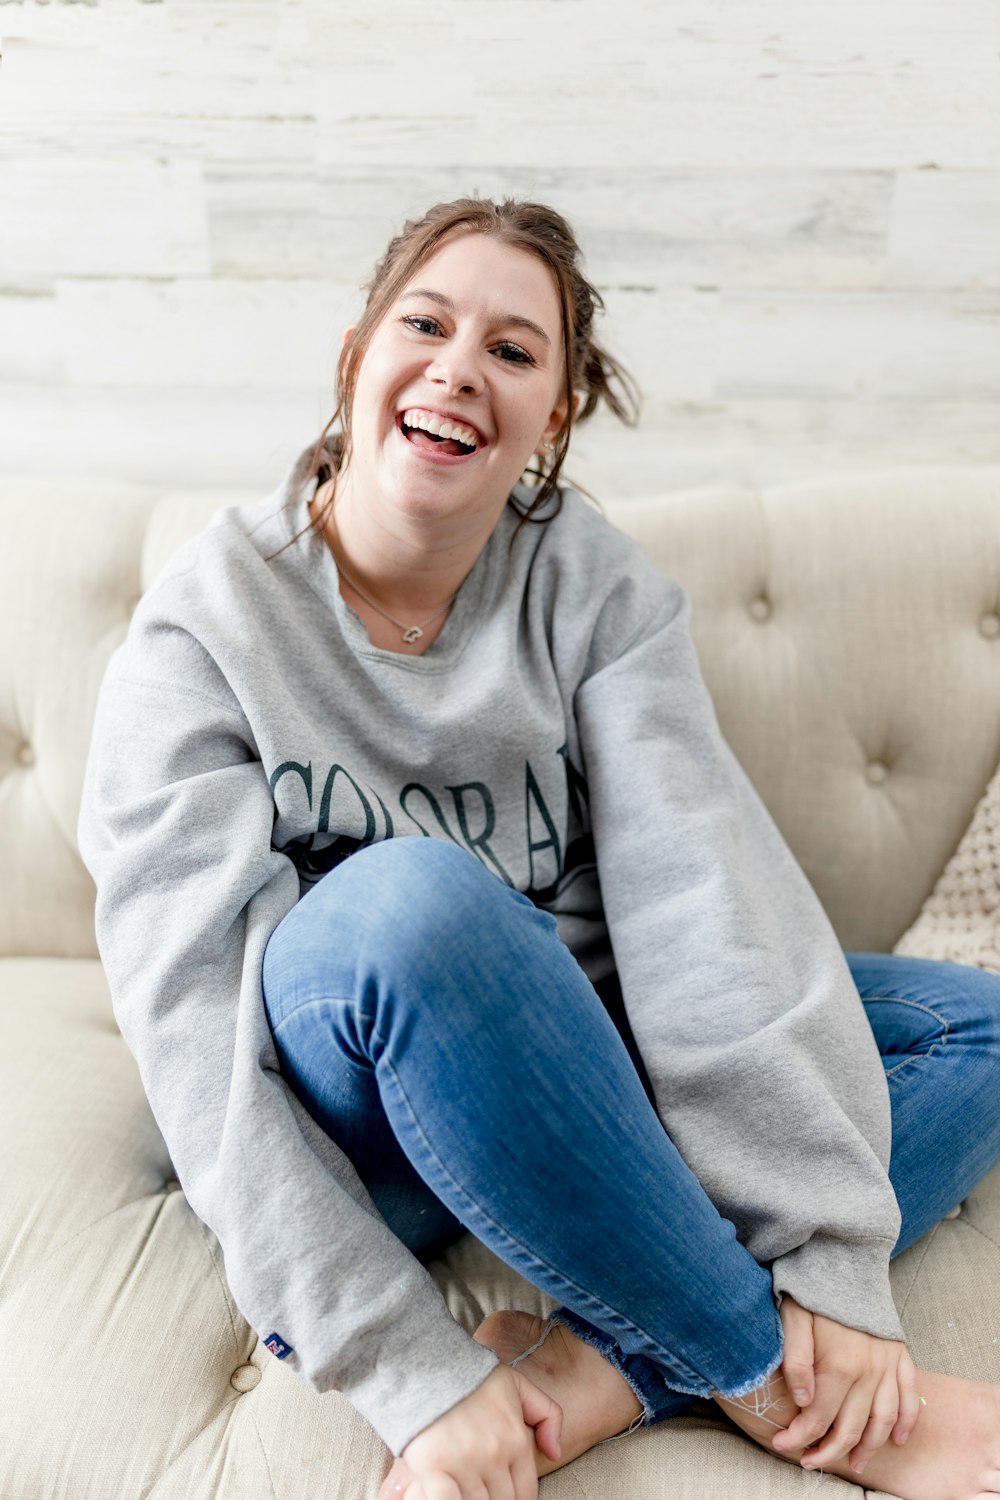 a woman is sitting on a couch laughing